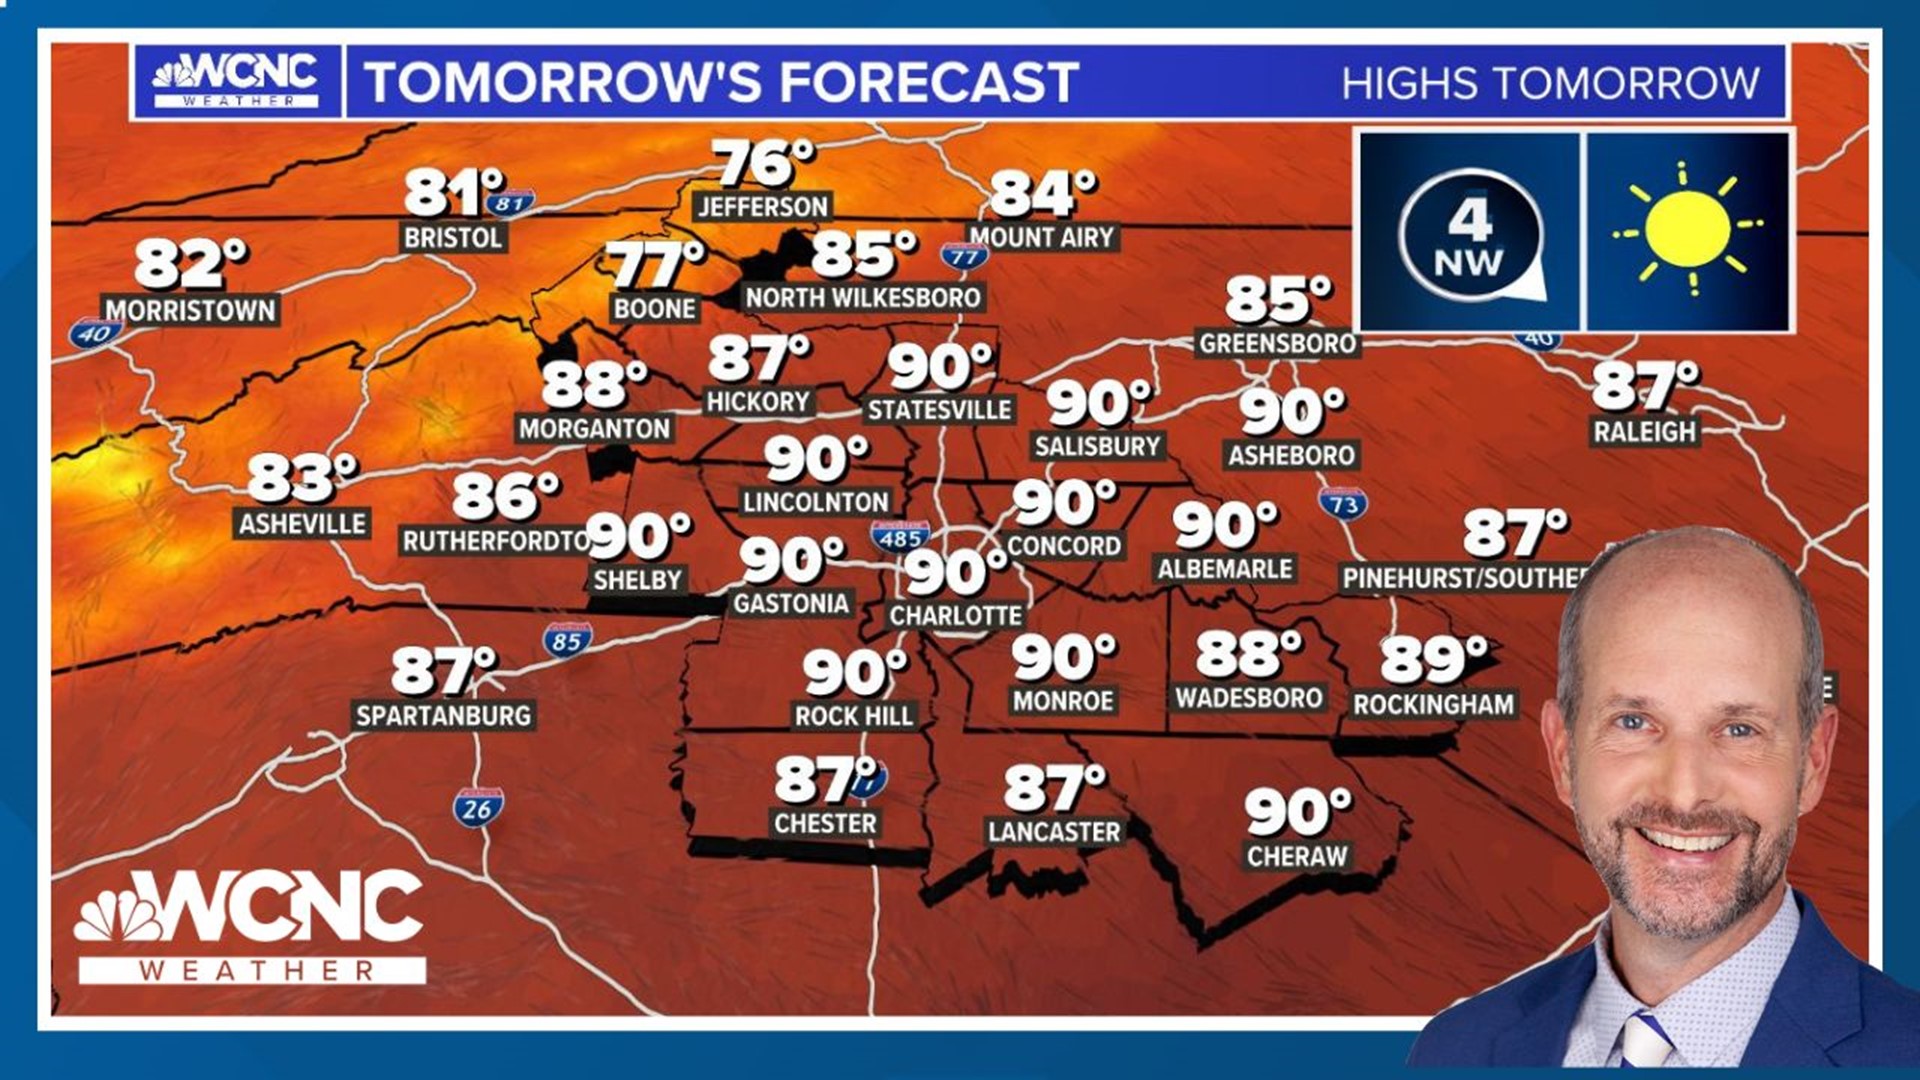 Unseasonably warm highs continue in the upper 80s to near 90 degrees.